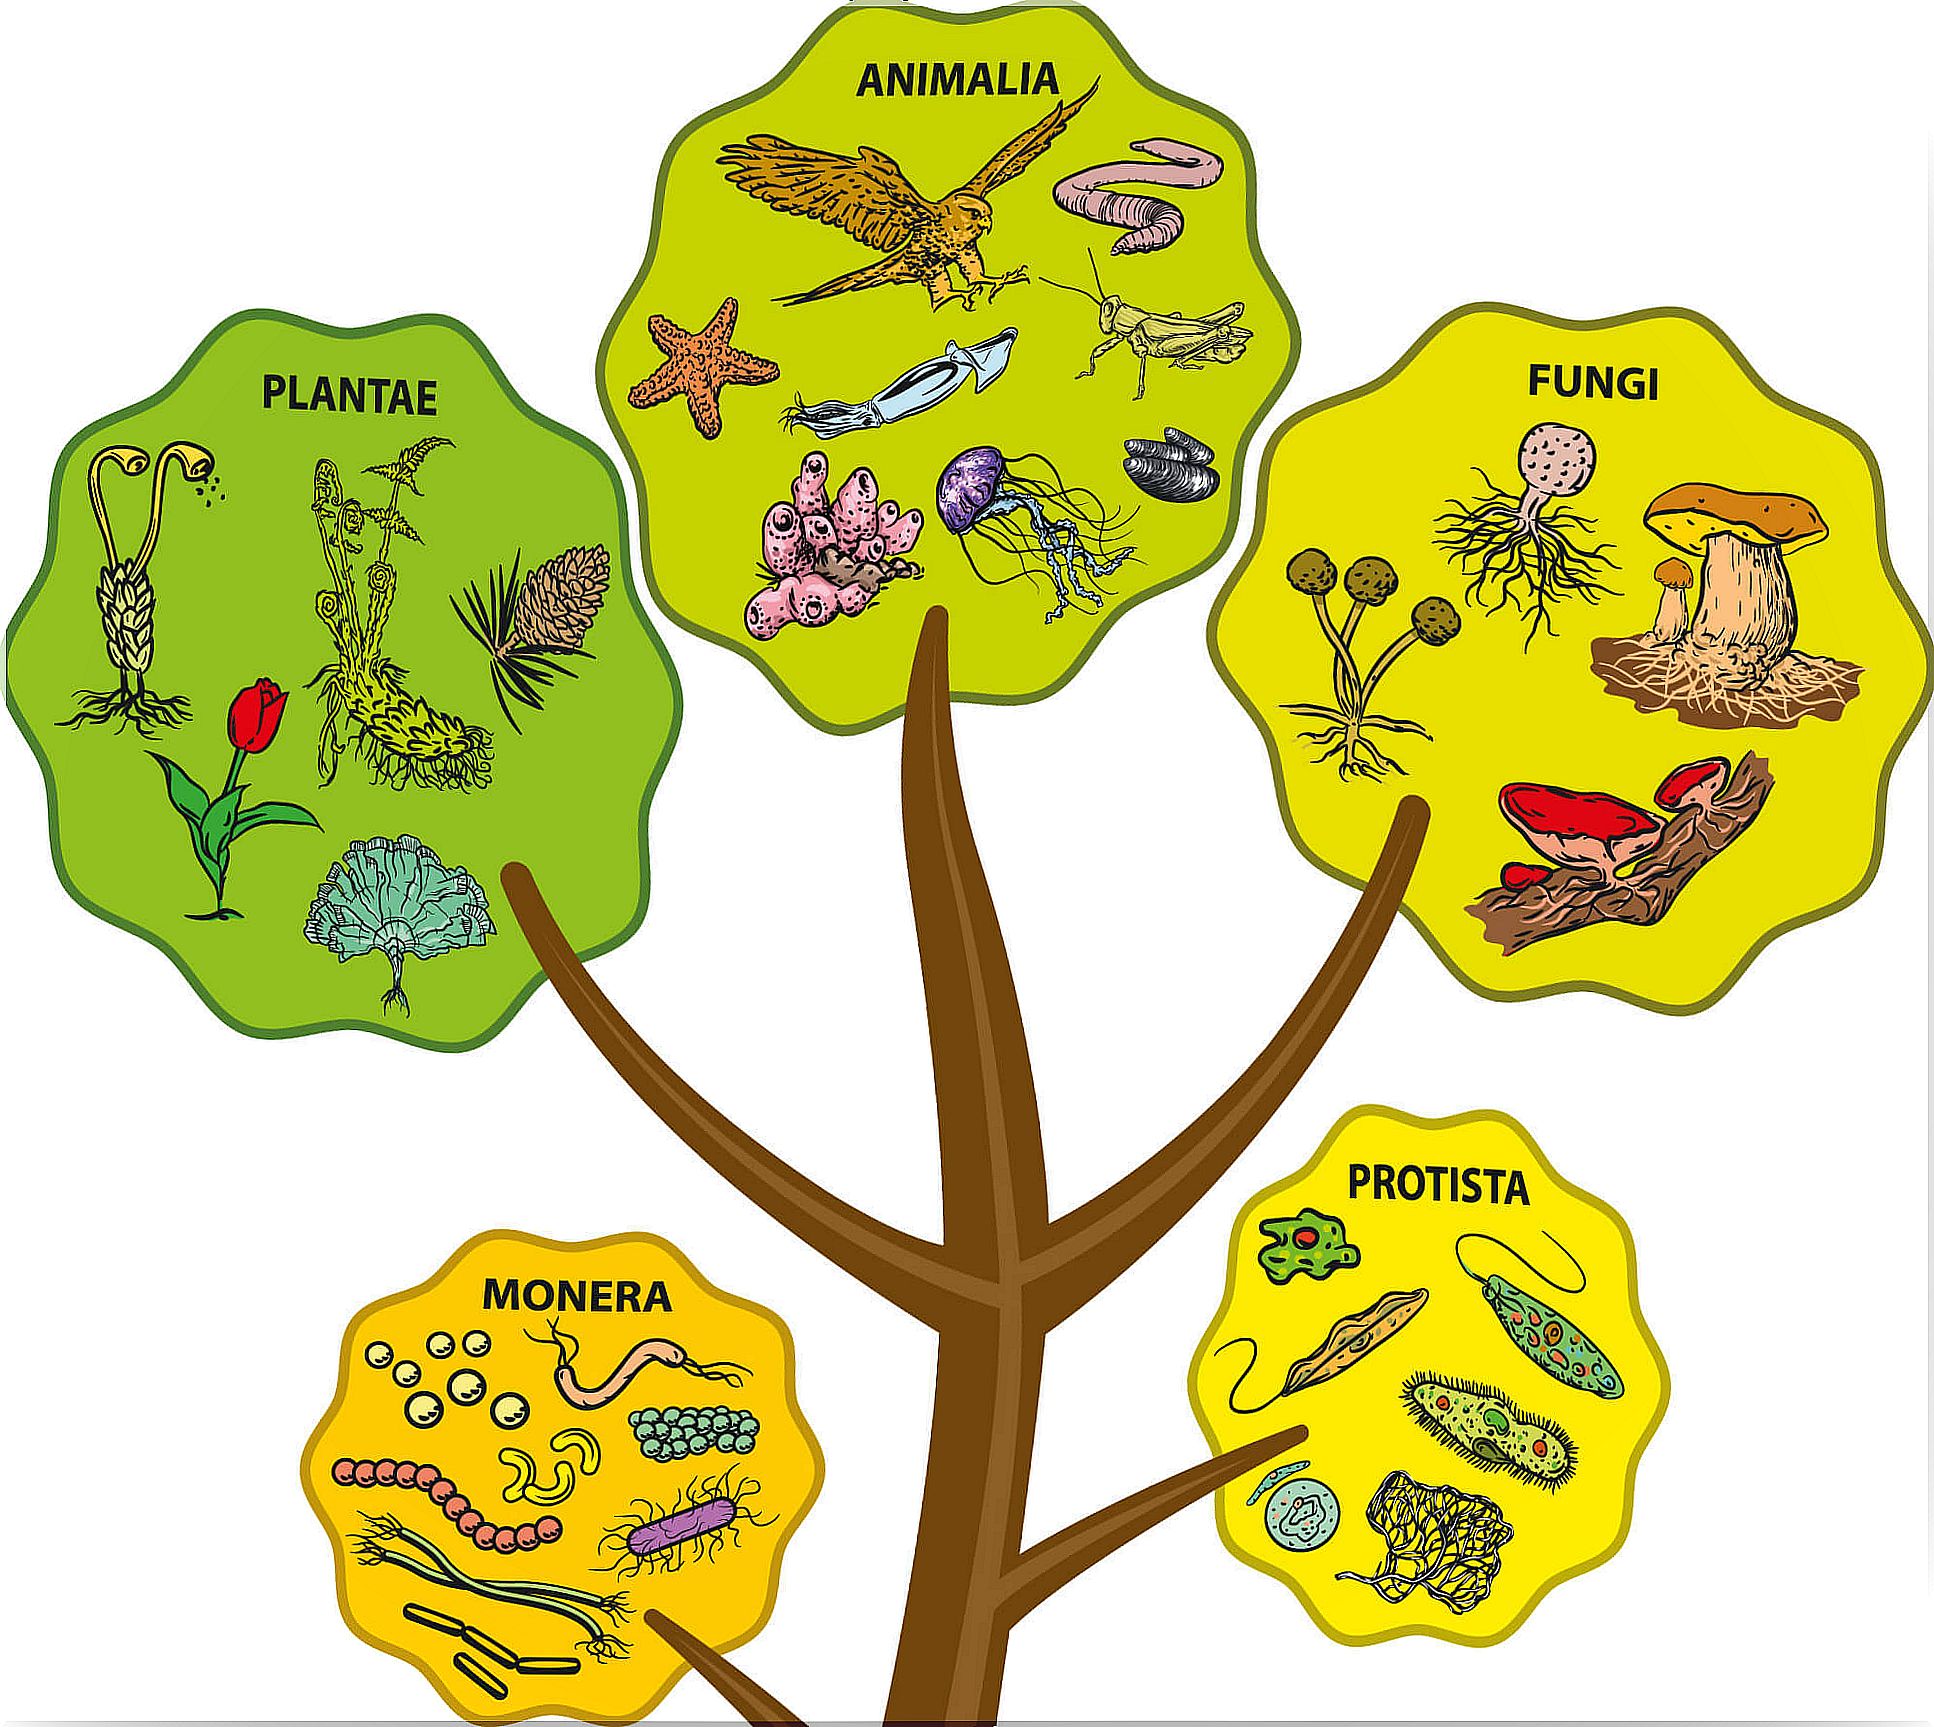 The 5 kingdoms of living things for children.